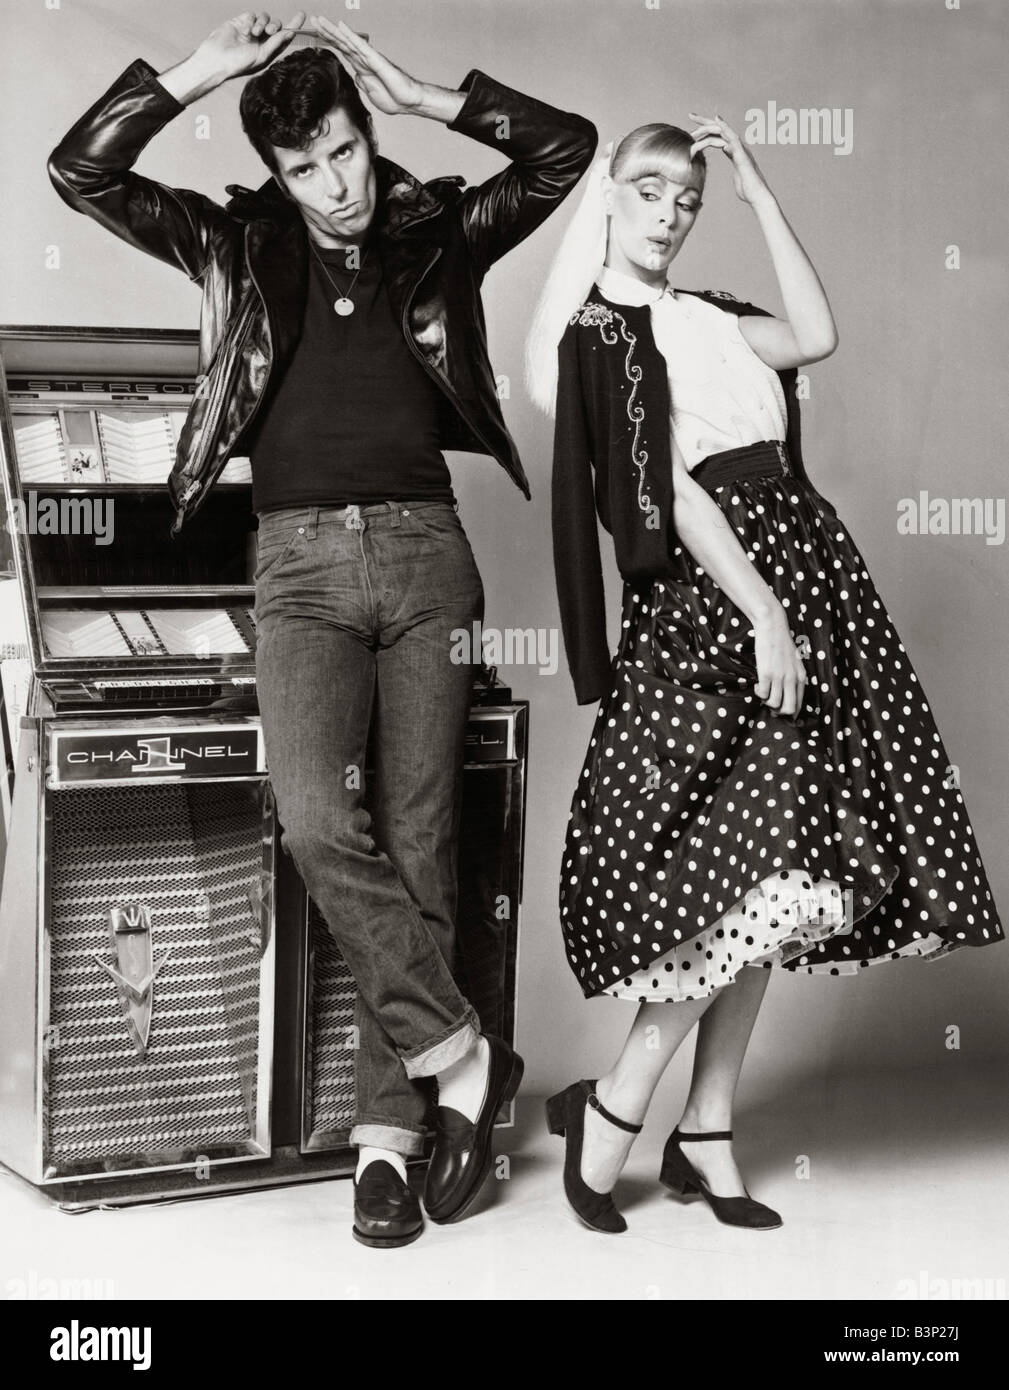 Models posing wearing fifties style fashion man wearing jeans black t shirt  and black leather jacket combing his hair standing next to a girl wearing a  wide floppy skirt and beaded cardigan